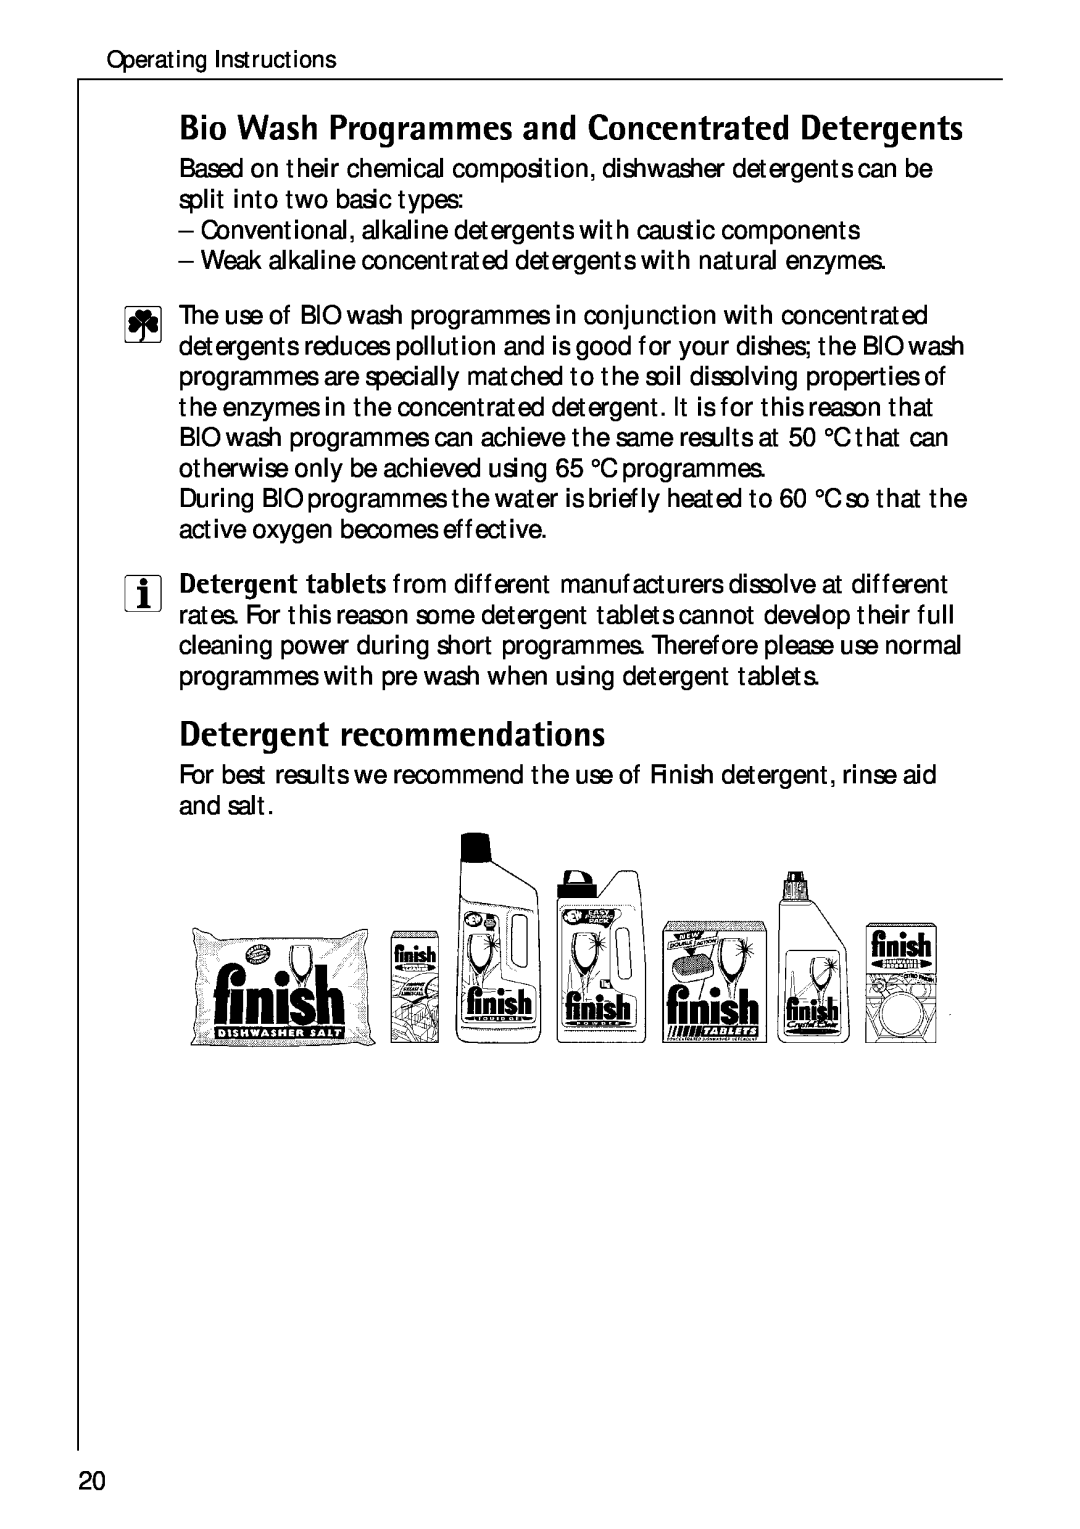 Electrolux 50750 VI manual Bio Wash Programmes and Concentrated Detergents, Detergent recommendations 